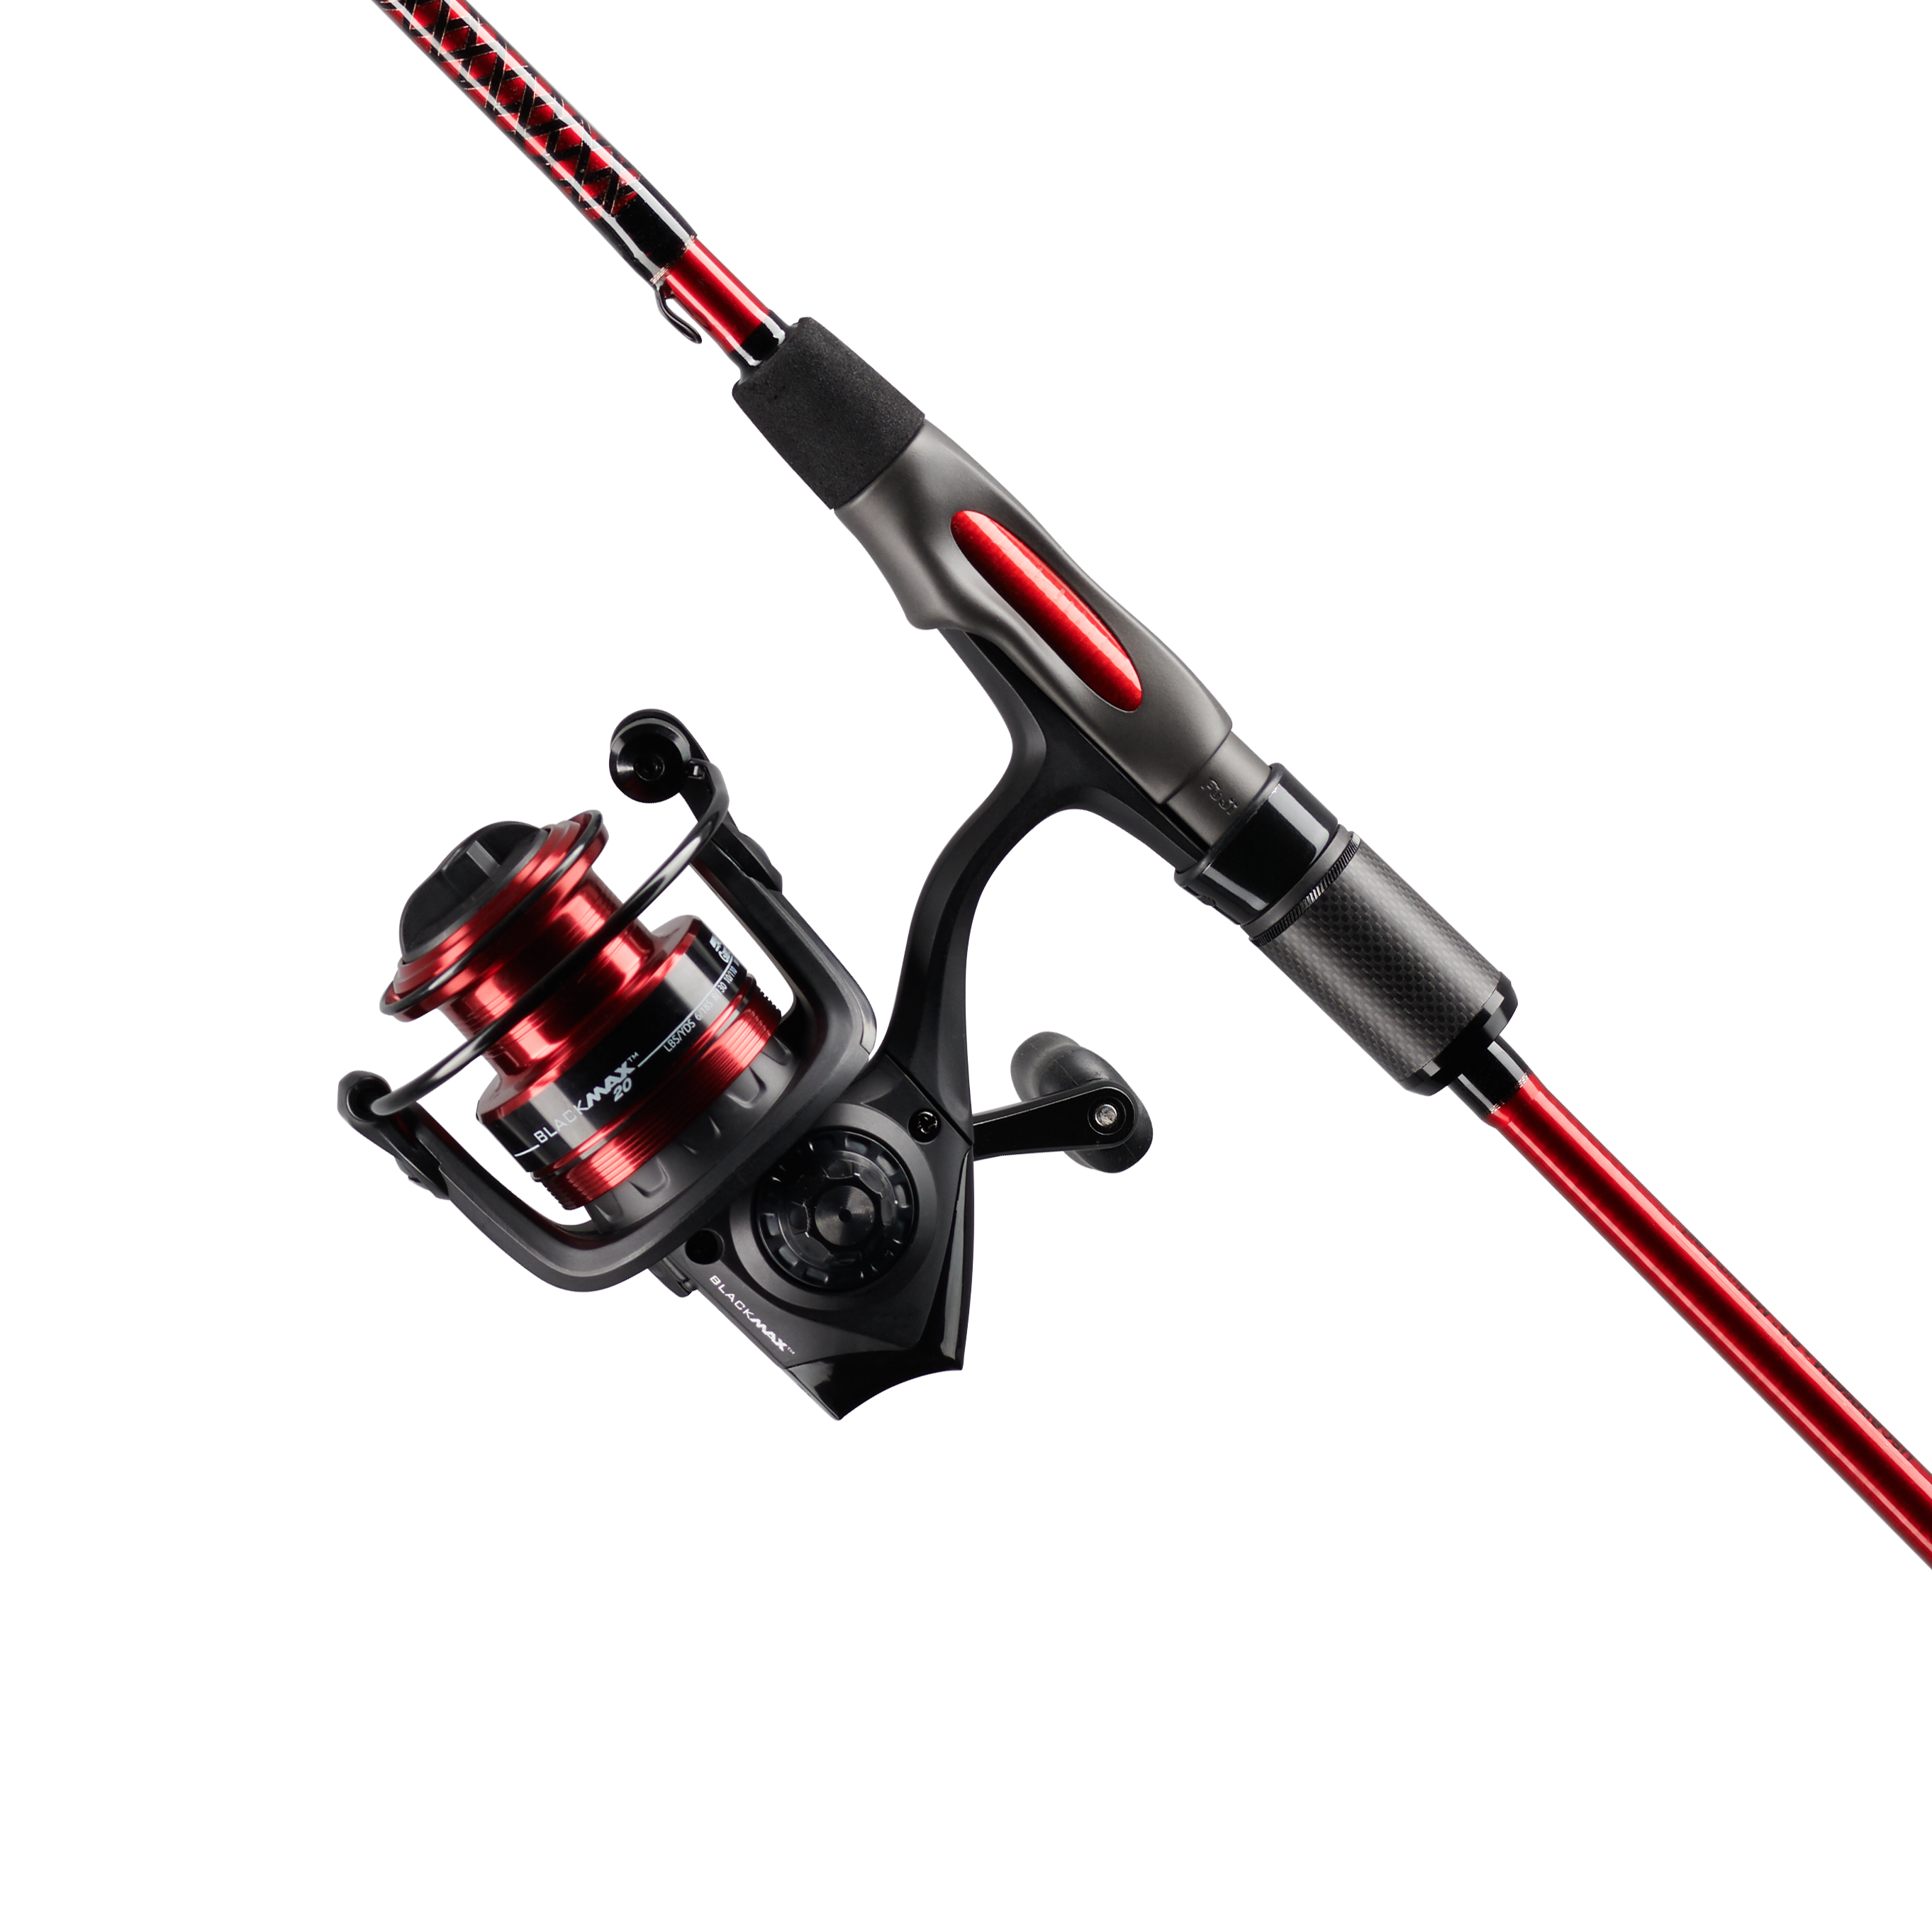 Ugly Stik 6’6” Carbon Spinning Fishing Rod and Reel Spinning Combo - image 4 of 5